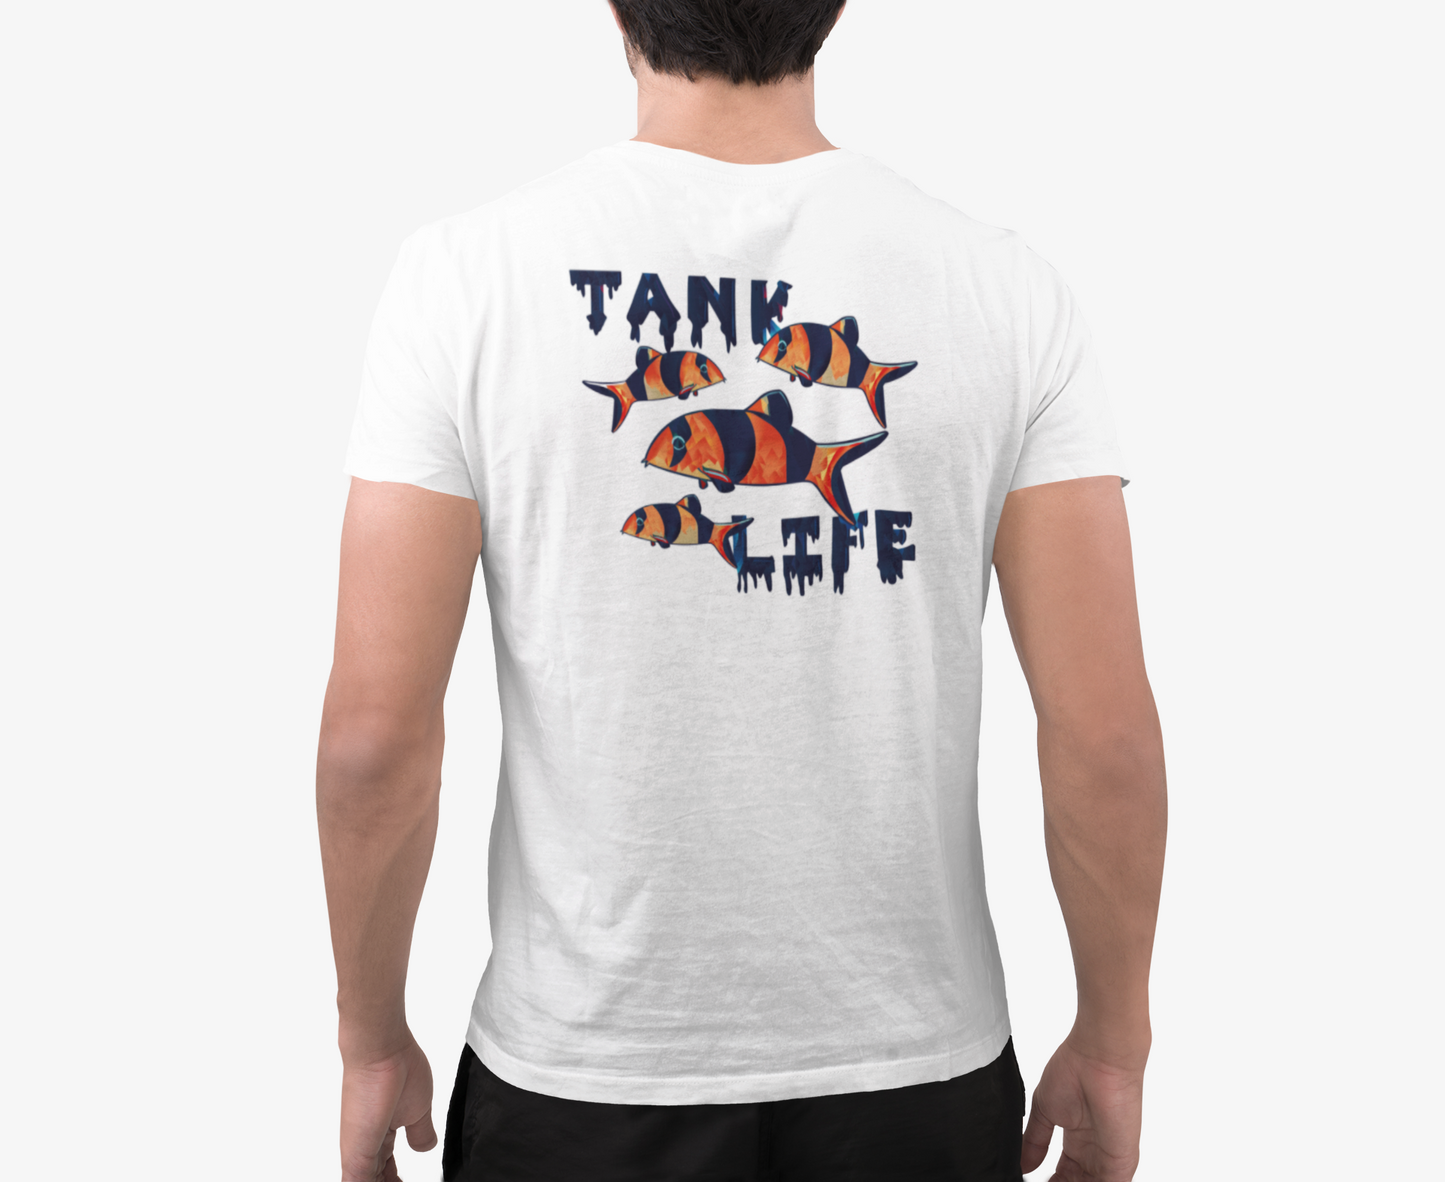 The Tank Life Apparel clown loach design on a classic tee with our custom TLA sleeve label